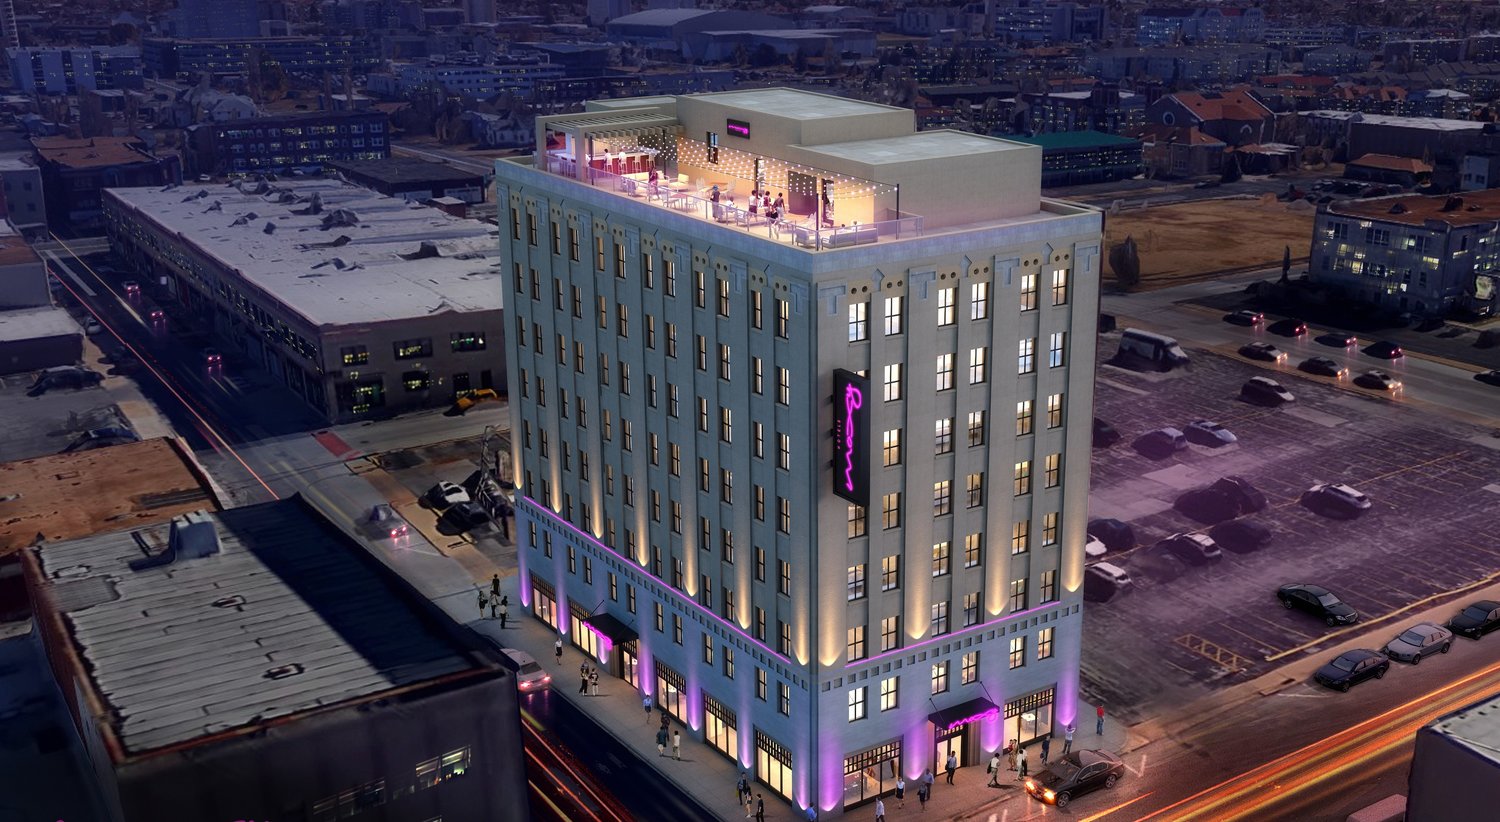 MOXY MOTION: The opening for downtown Springfield's Moxy, a Marriott hotel brand, is being pushed from late 2022 into spring or summer 2023.